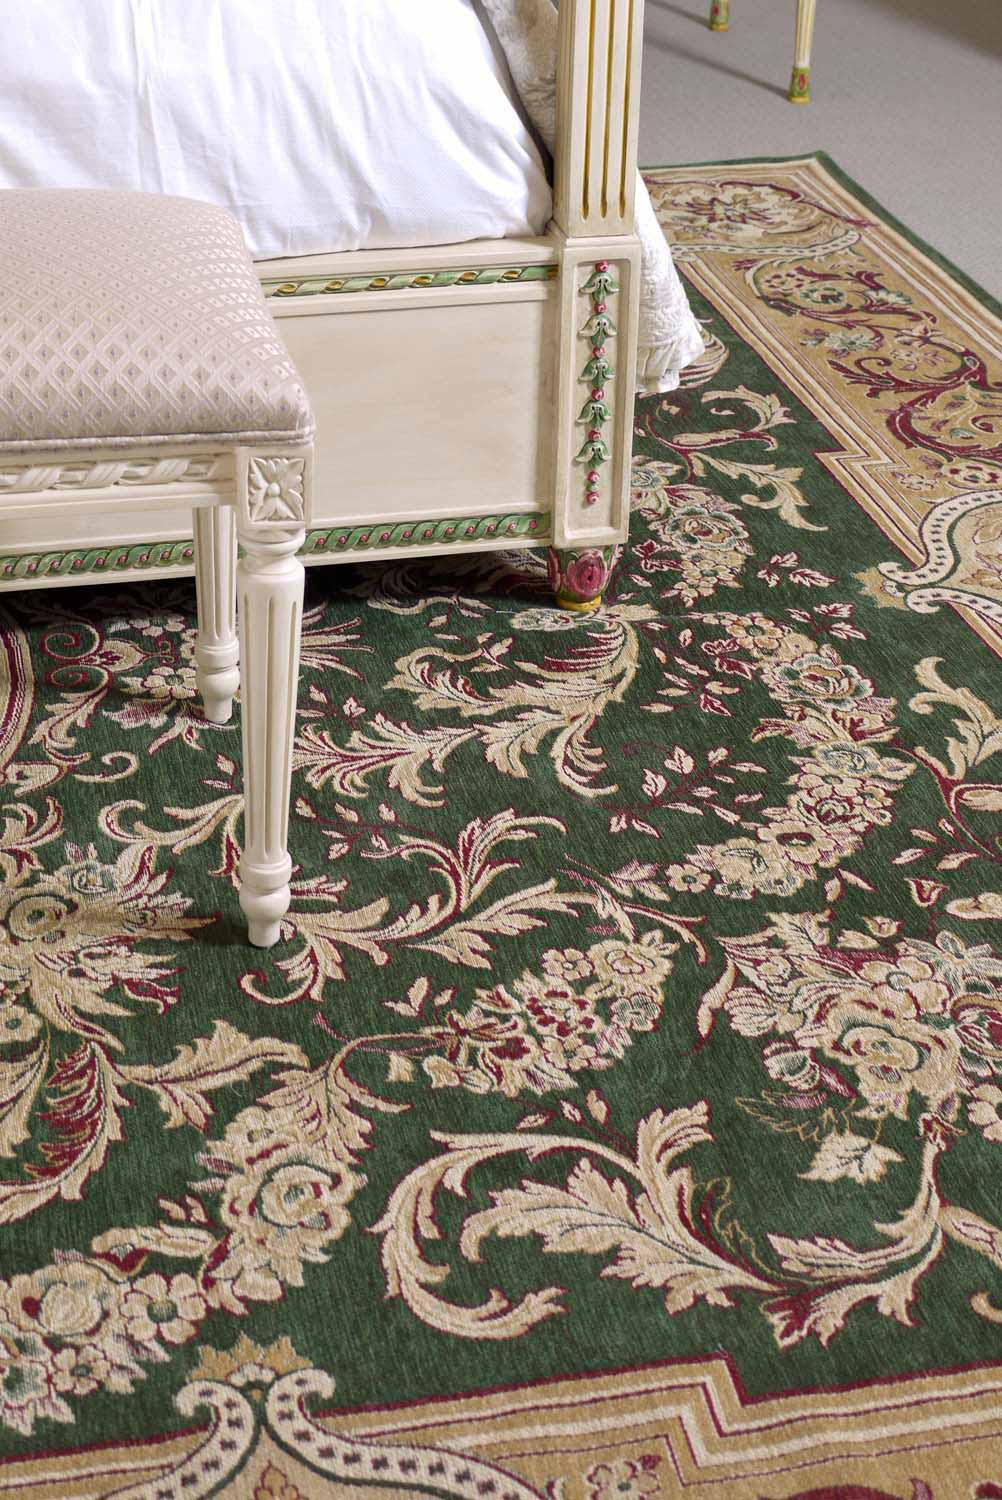 15 French style rugs and carpets